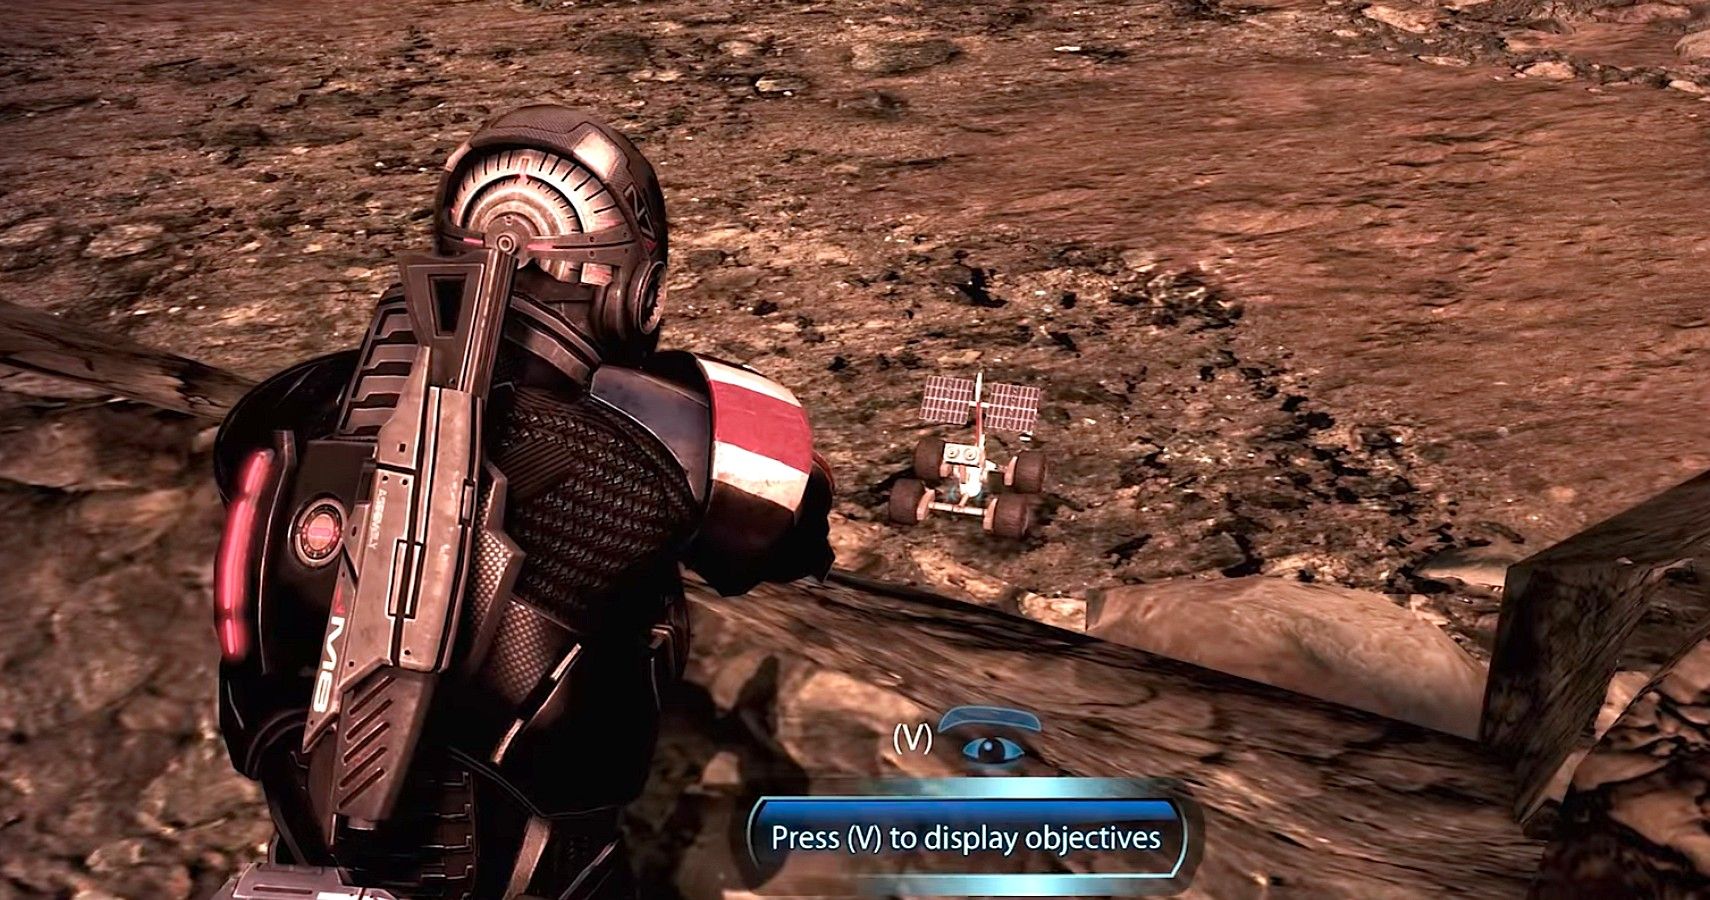 Mass Effect 3 Dev Reveals Mars Rover Easter Egg No One Has Found In Nine Years